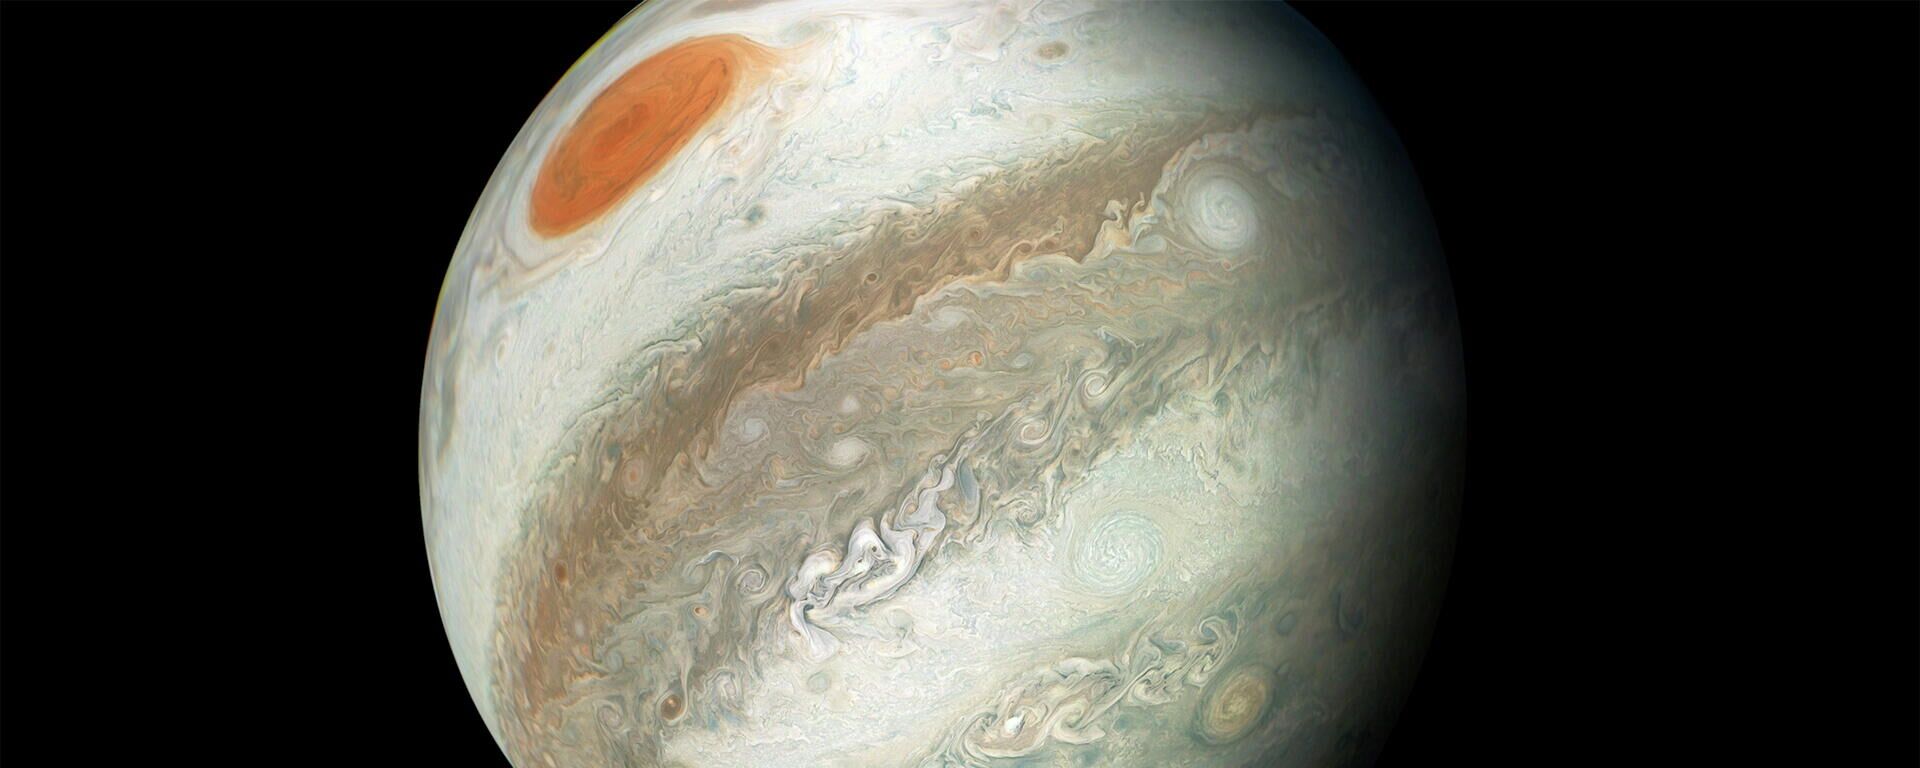 The view shows Jupiter including its Great red Spot captured by NASA's Juno spacecraft on the outbound leg of its 12th close flyby of the gas giant planet, April 1, 2018. - Sputnik International, 1920, 23.06.2022